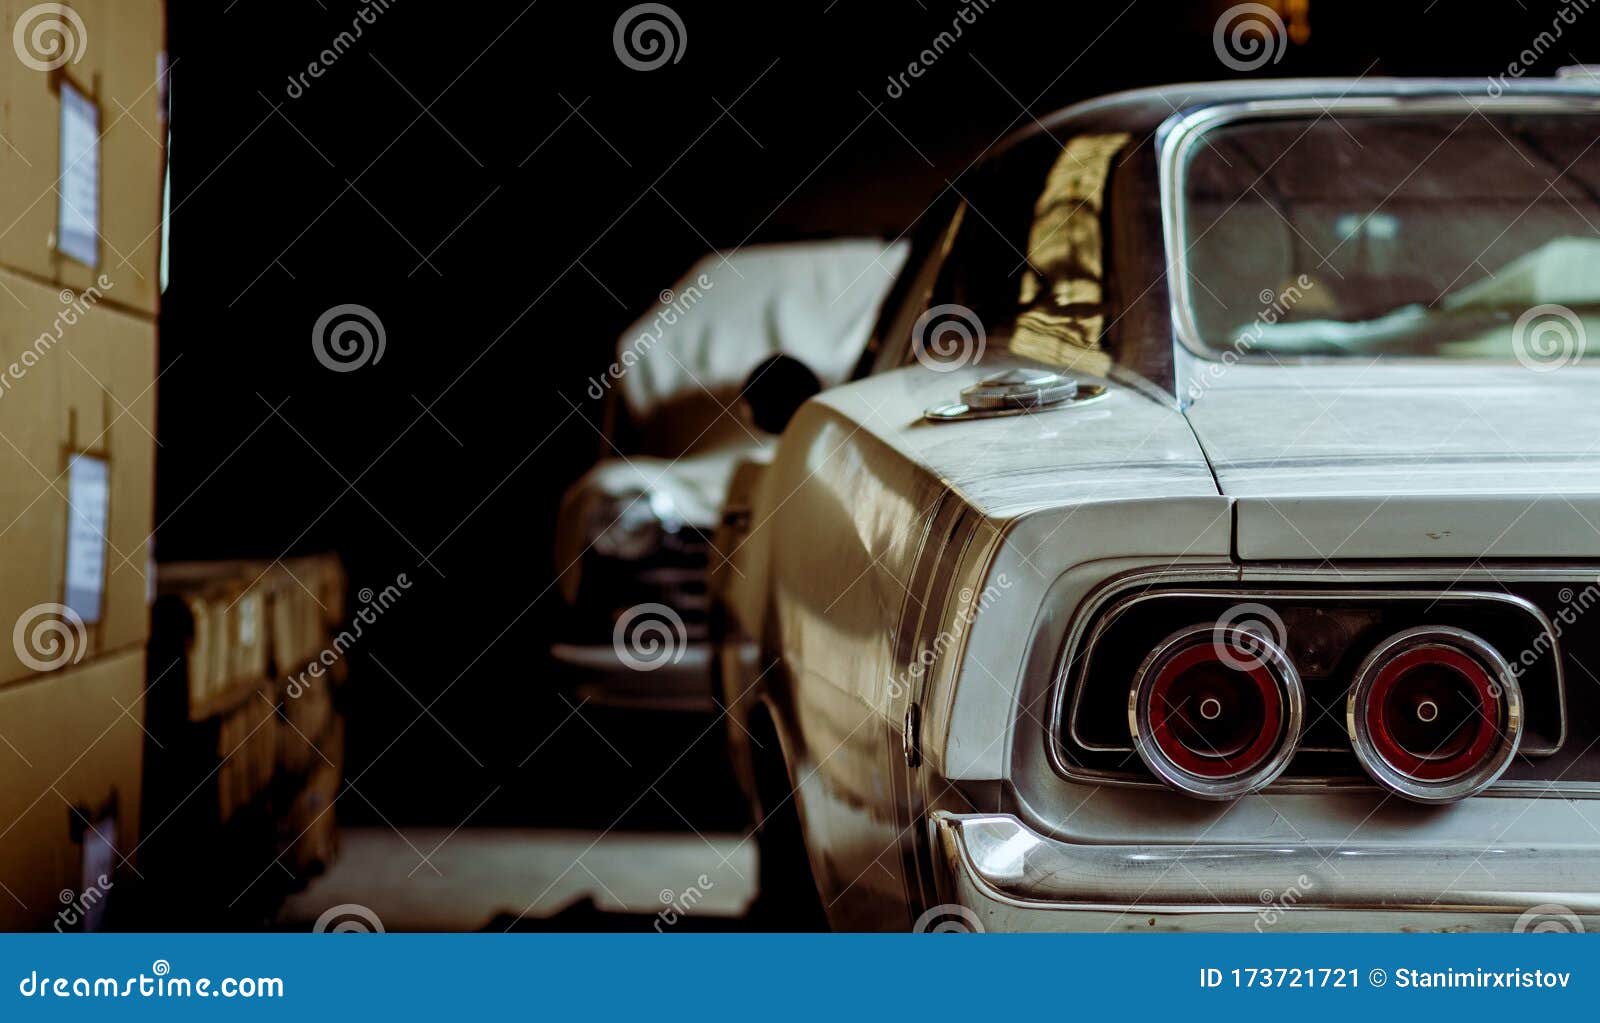 Retro Cars  In An Old Warehouse  Stock Image Image of 